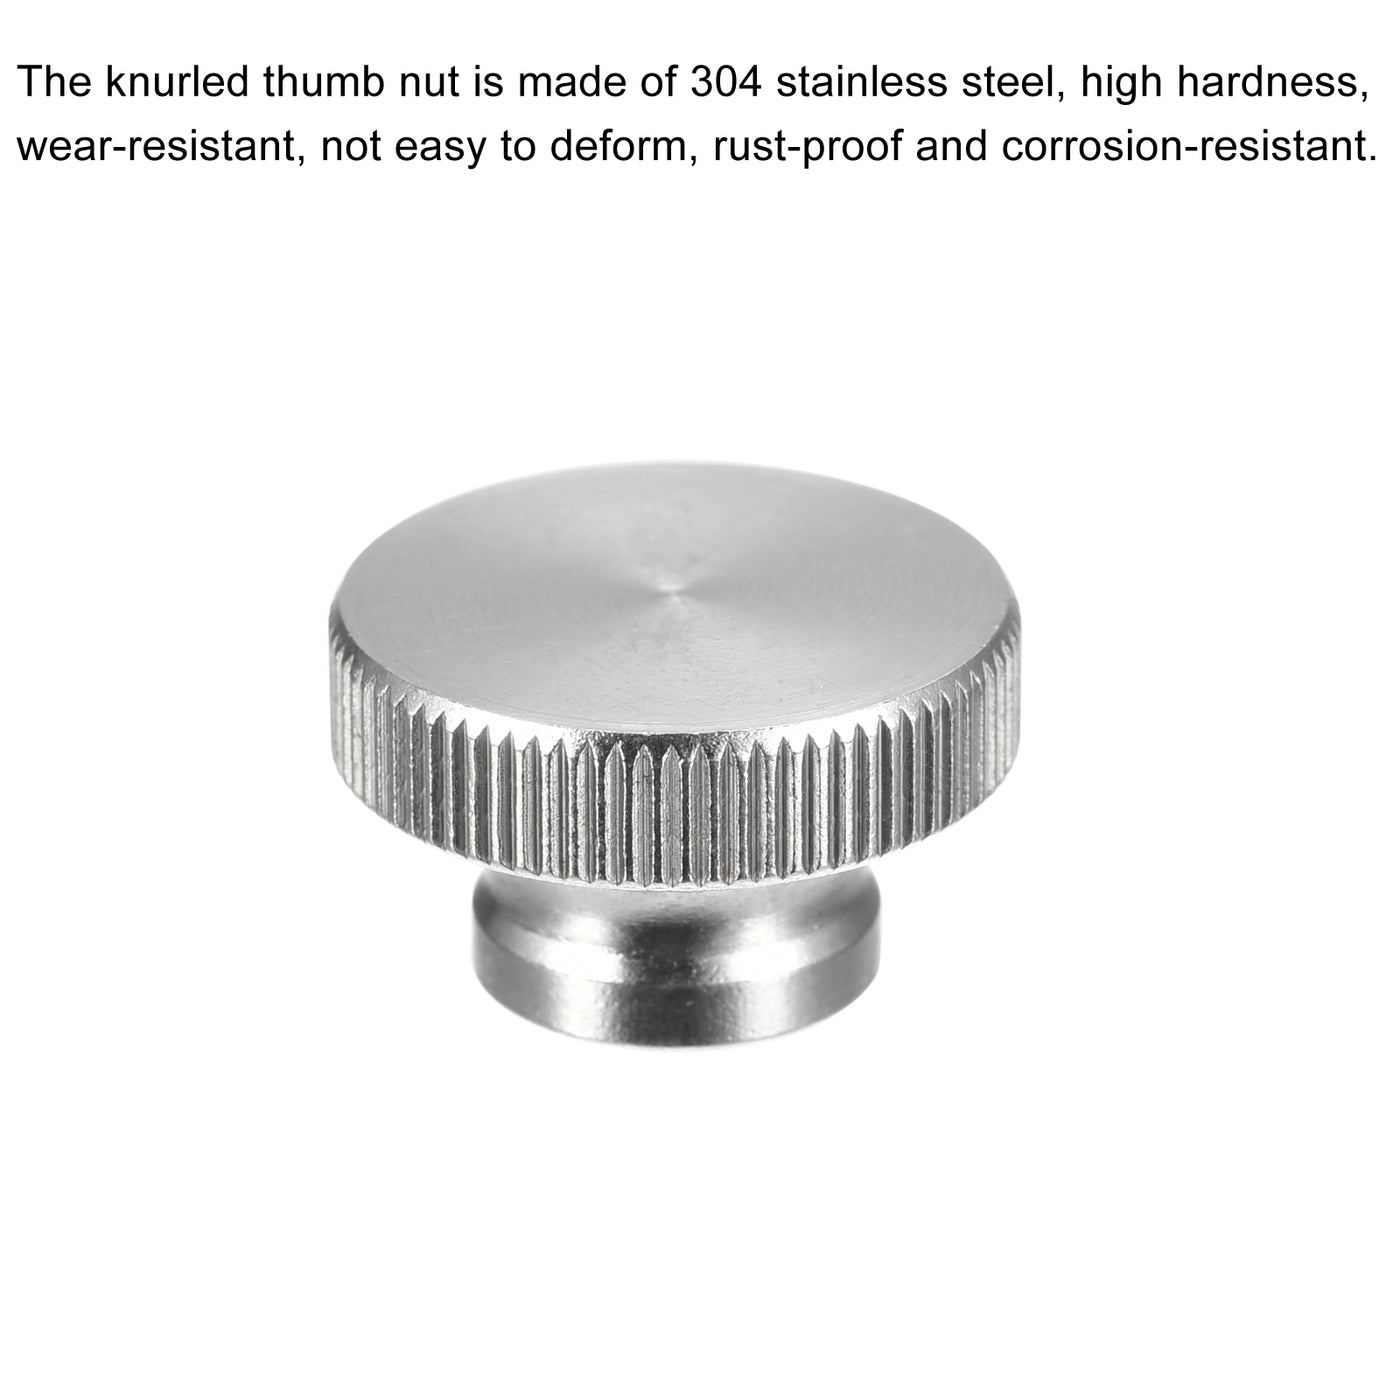 uxcell Uxcell Knurled Thumb Nuts, 10pcs M6 x D20mm x H12mm 304 Stainless Steel Blind Hole Nuts